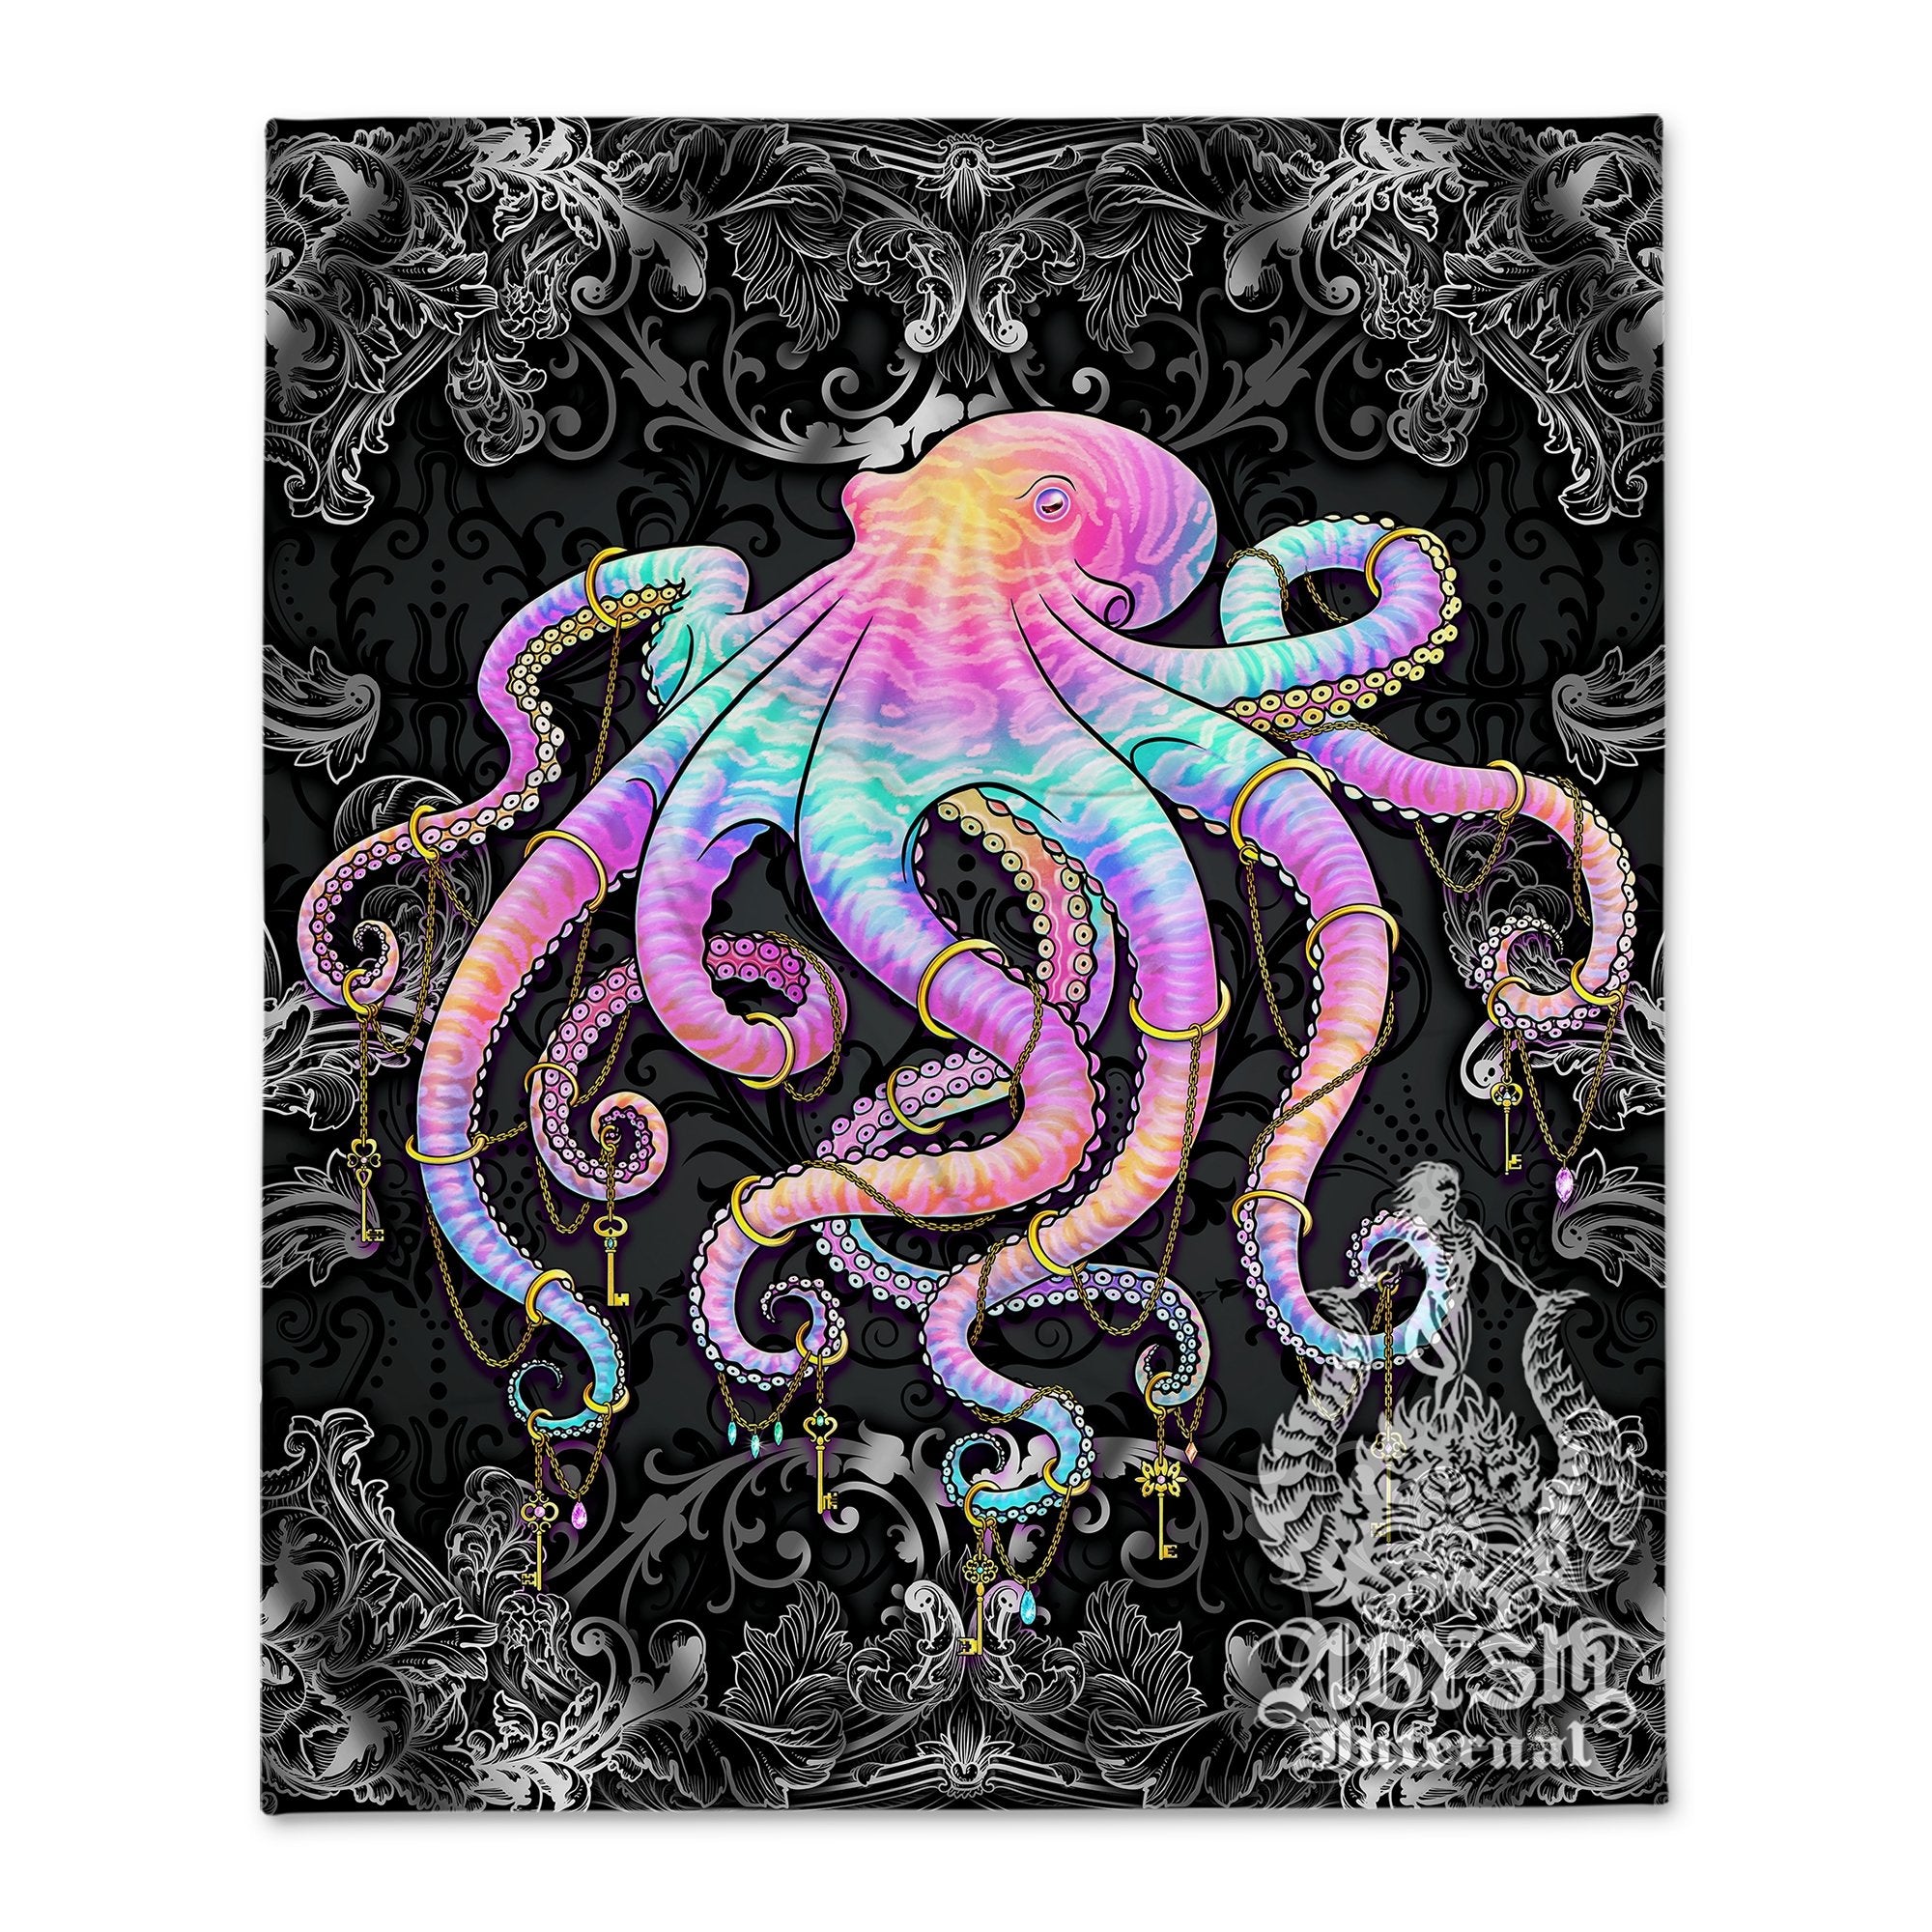 Octopus Tapestry, Indie Wall Hanging, Psychedelic and Aesthetic Home Decor, Art Print, Eclectic and Funky - Dark Pastel Punk - Abysm Internal